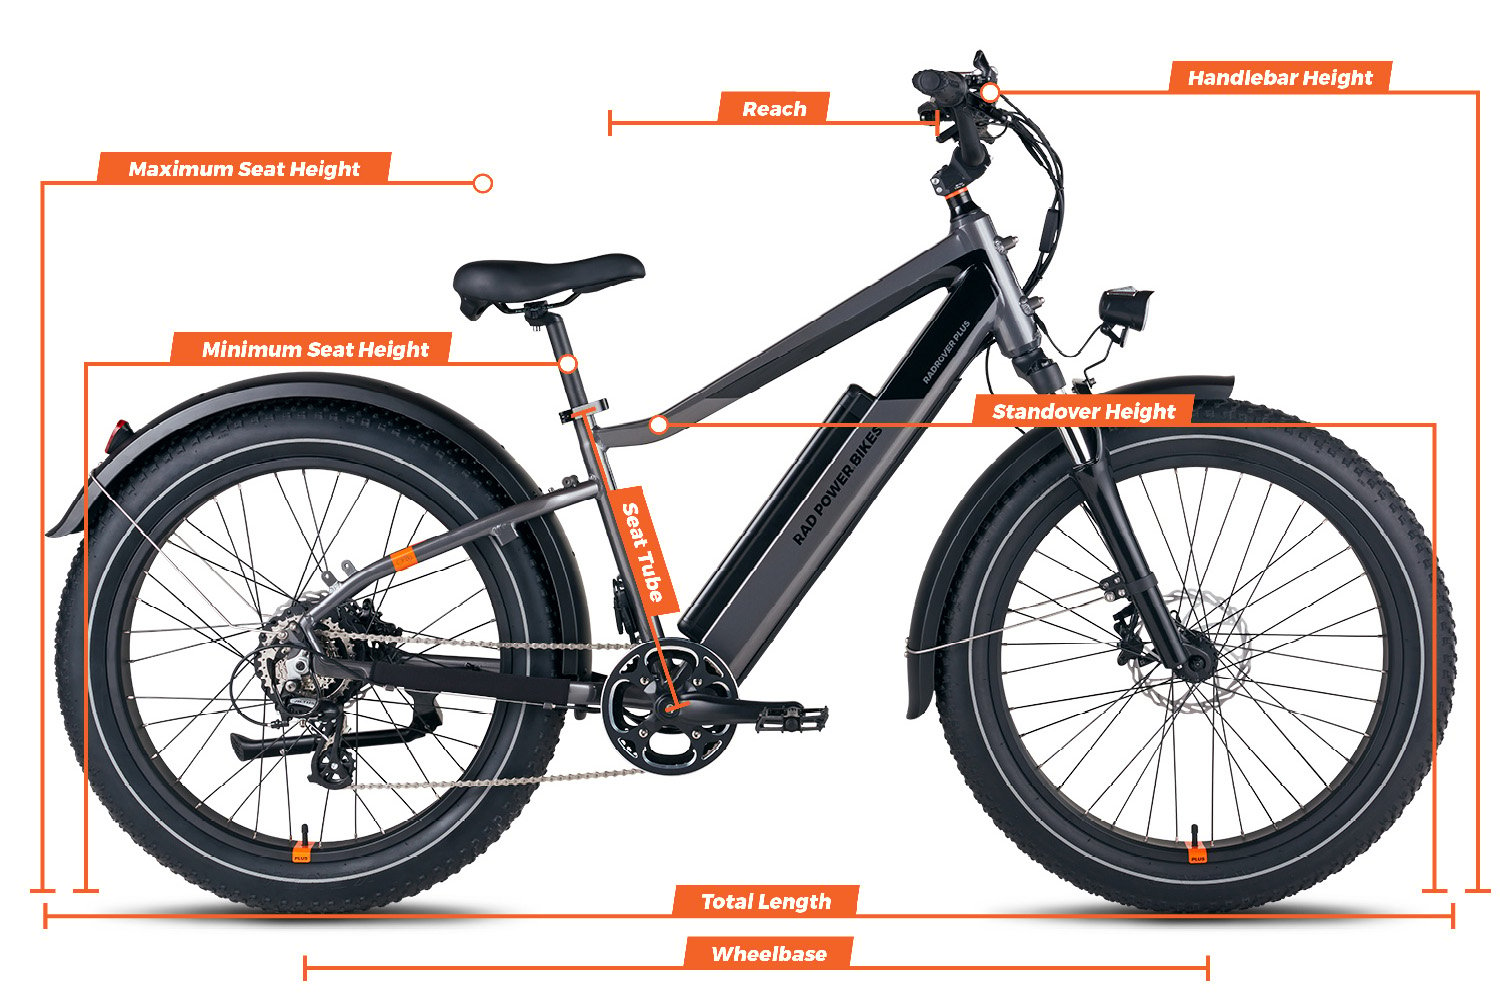 Geometry chart for the RadRover 6 Plus Electric Fat Tire Bike